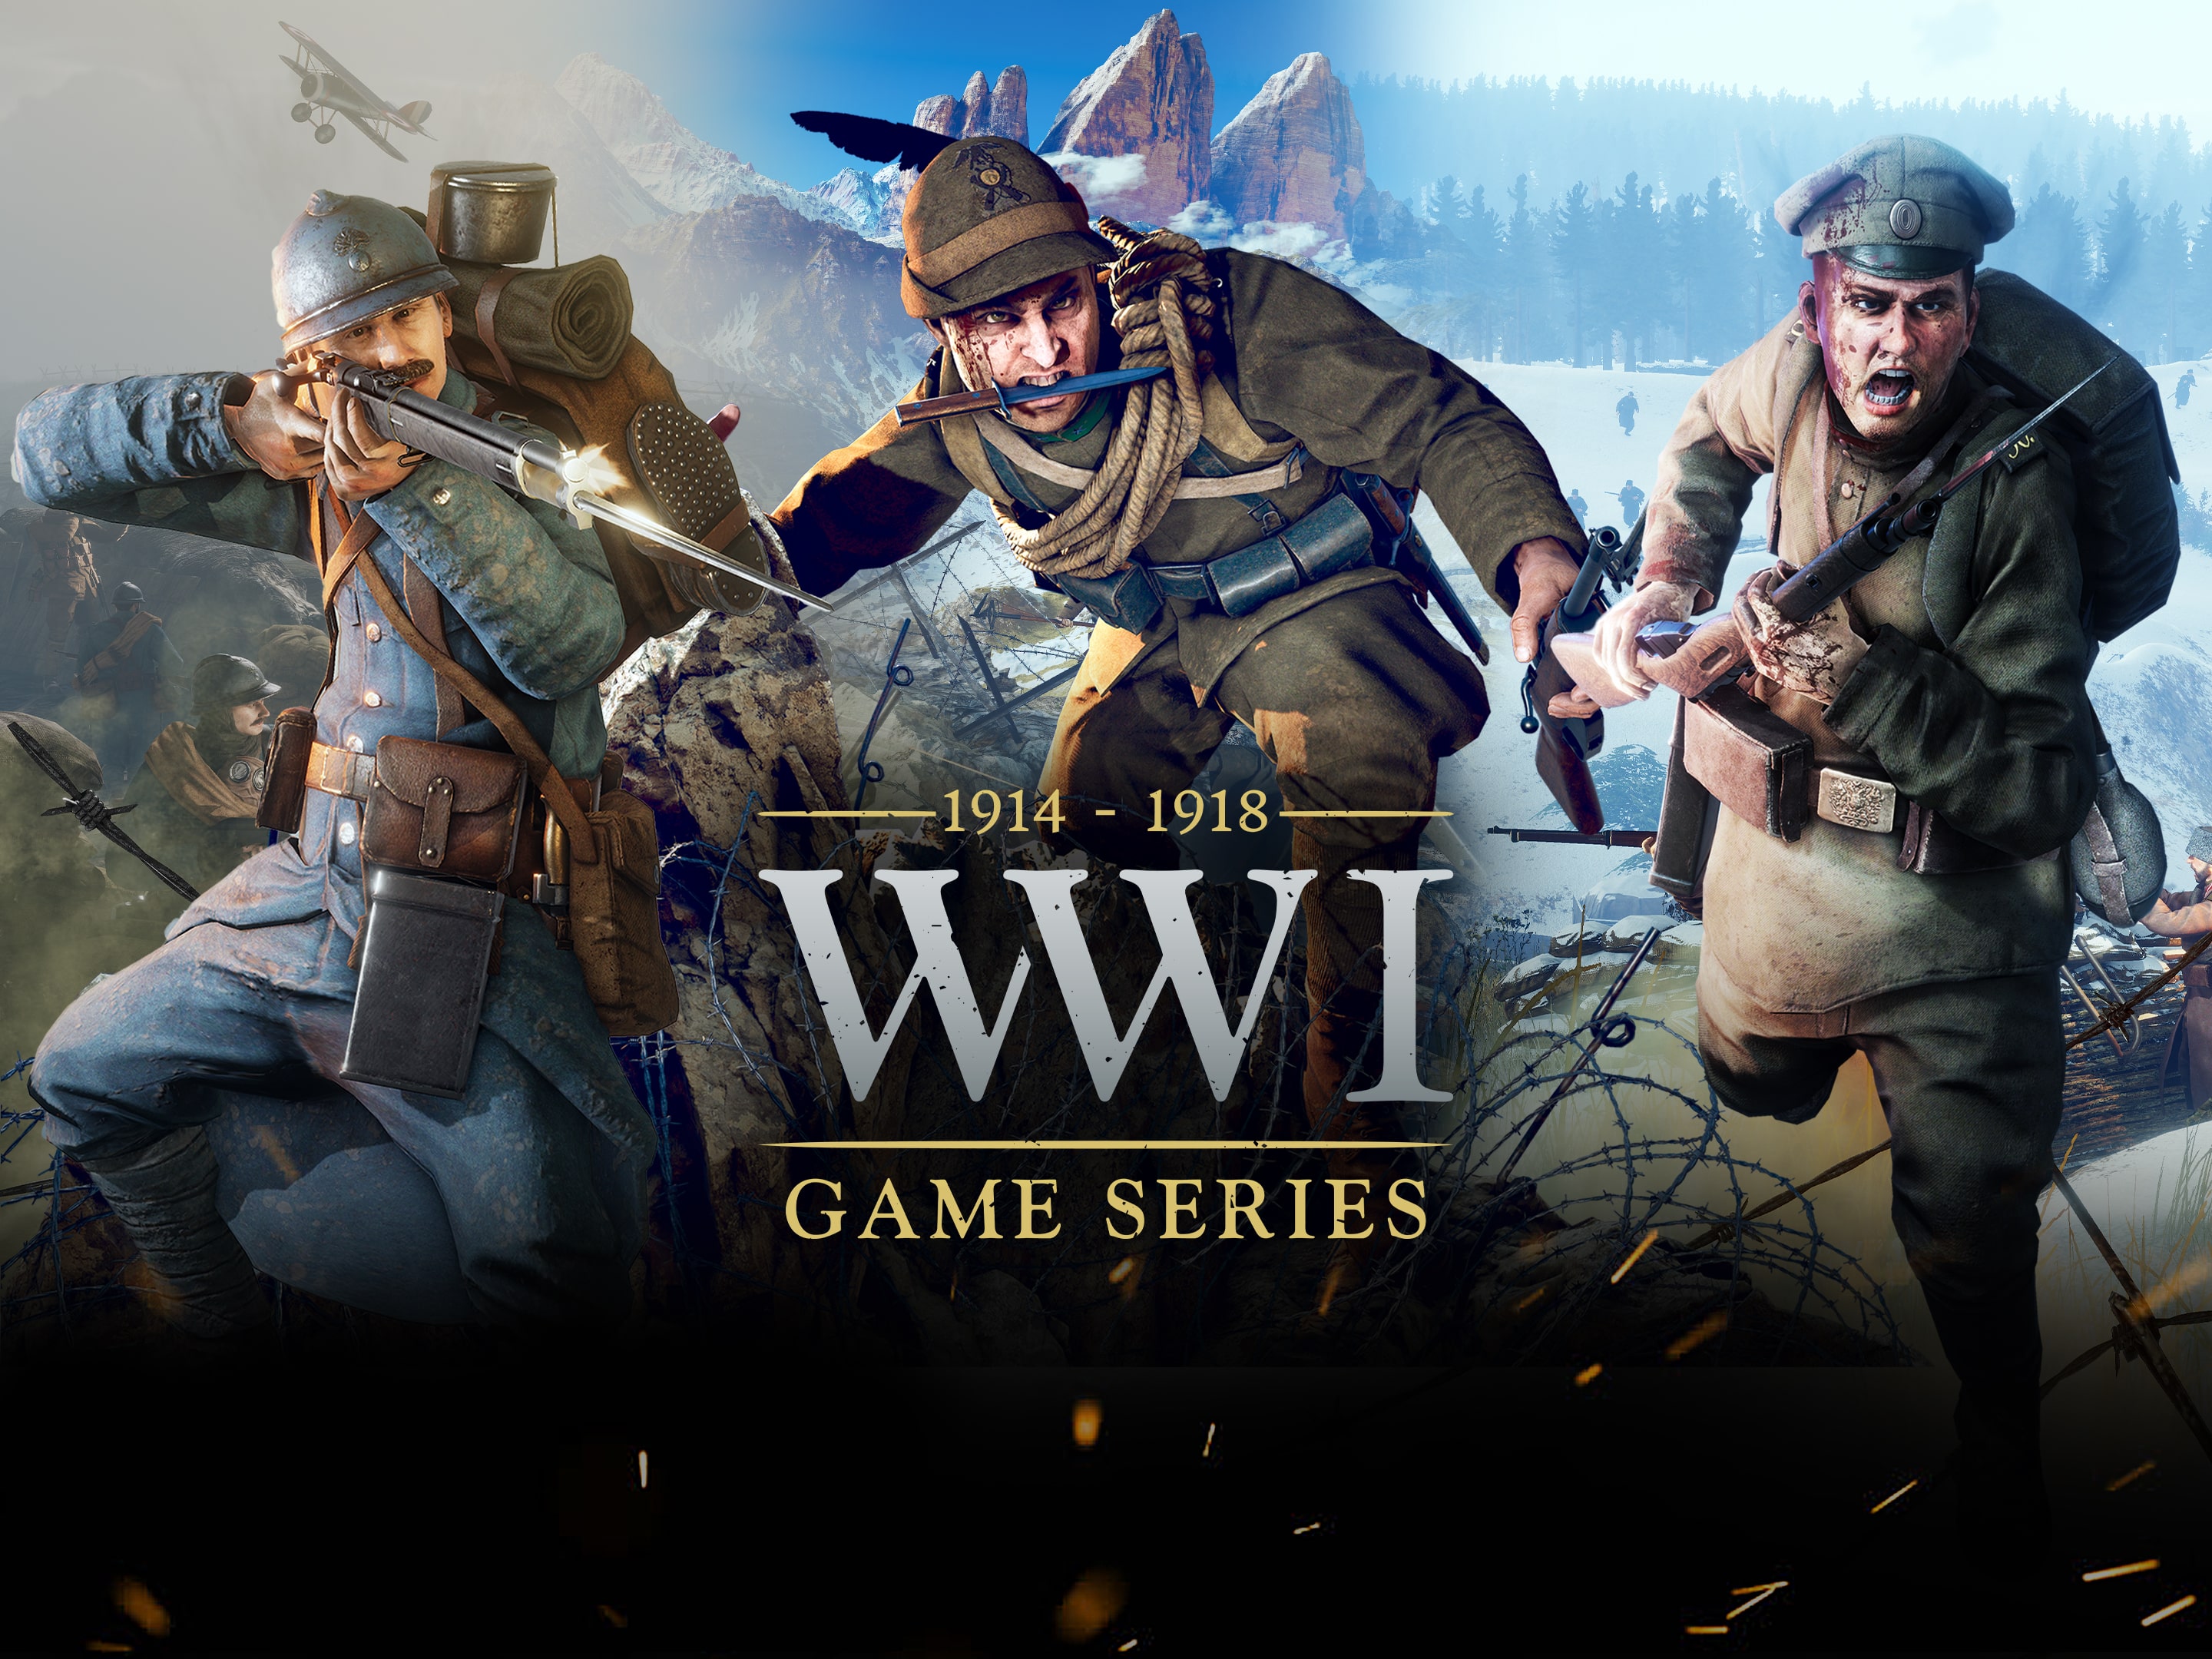 White War LIVE - WW1 Game Series on X: Even though the #Armistice